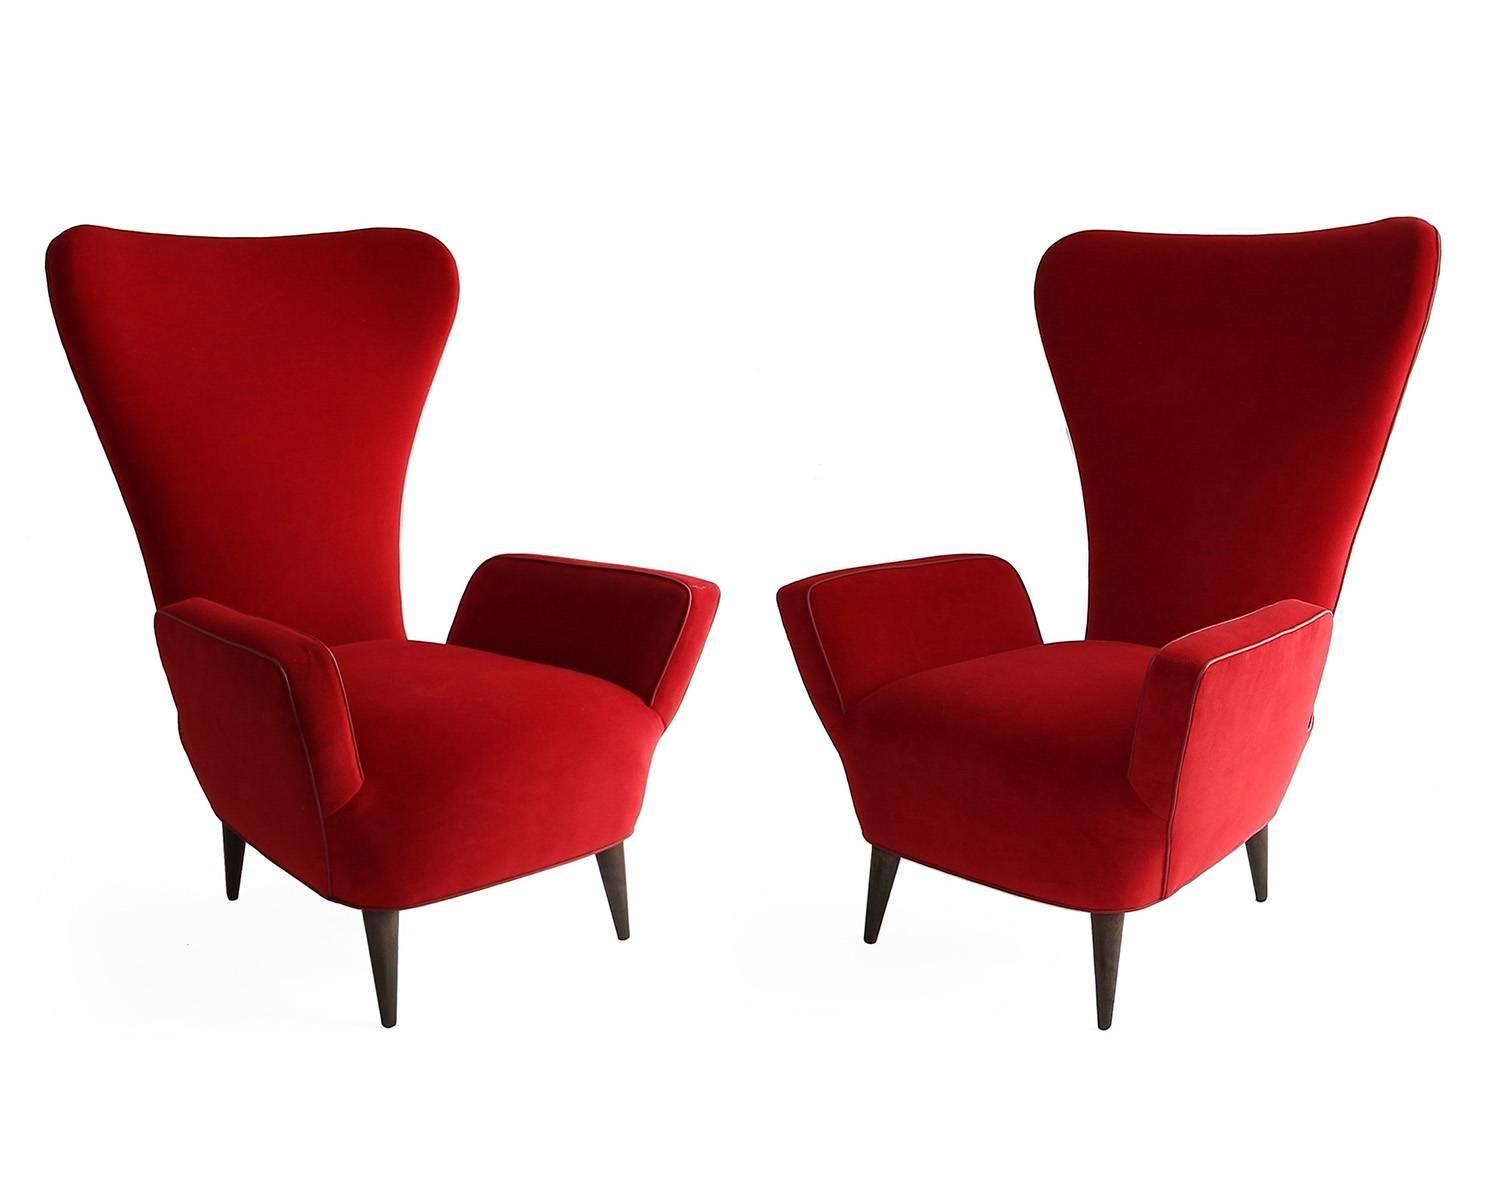 20th Century Pair of Rare Low-Slung Modern Italian Sculptural Chairs For Sale